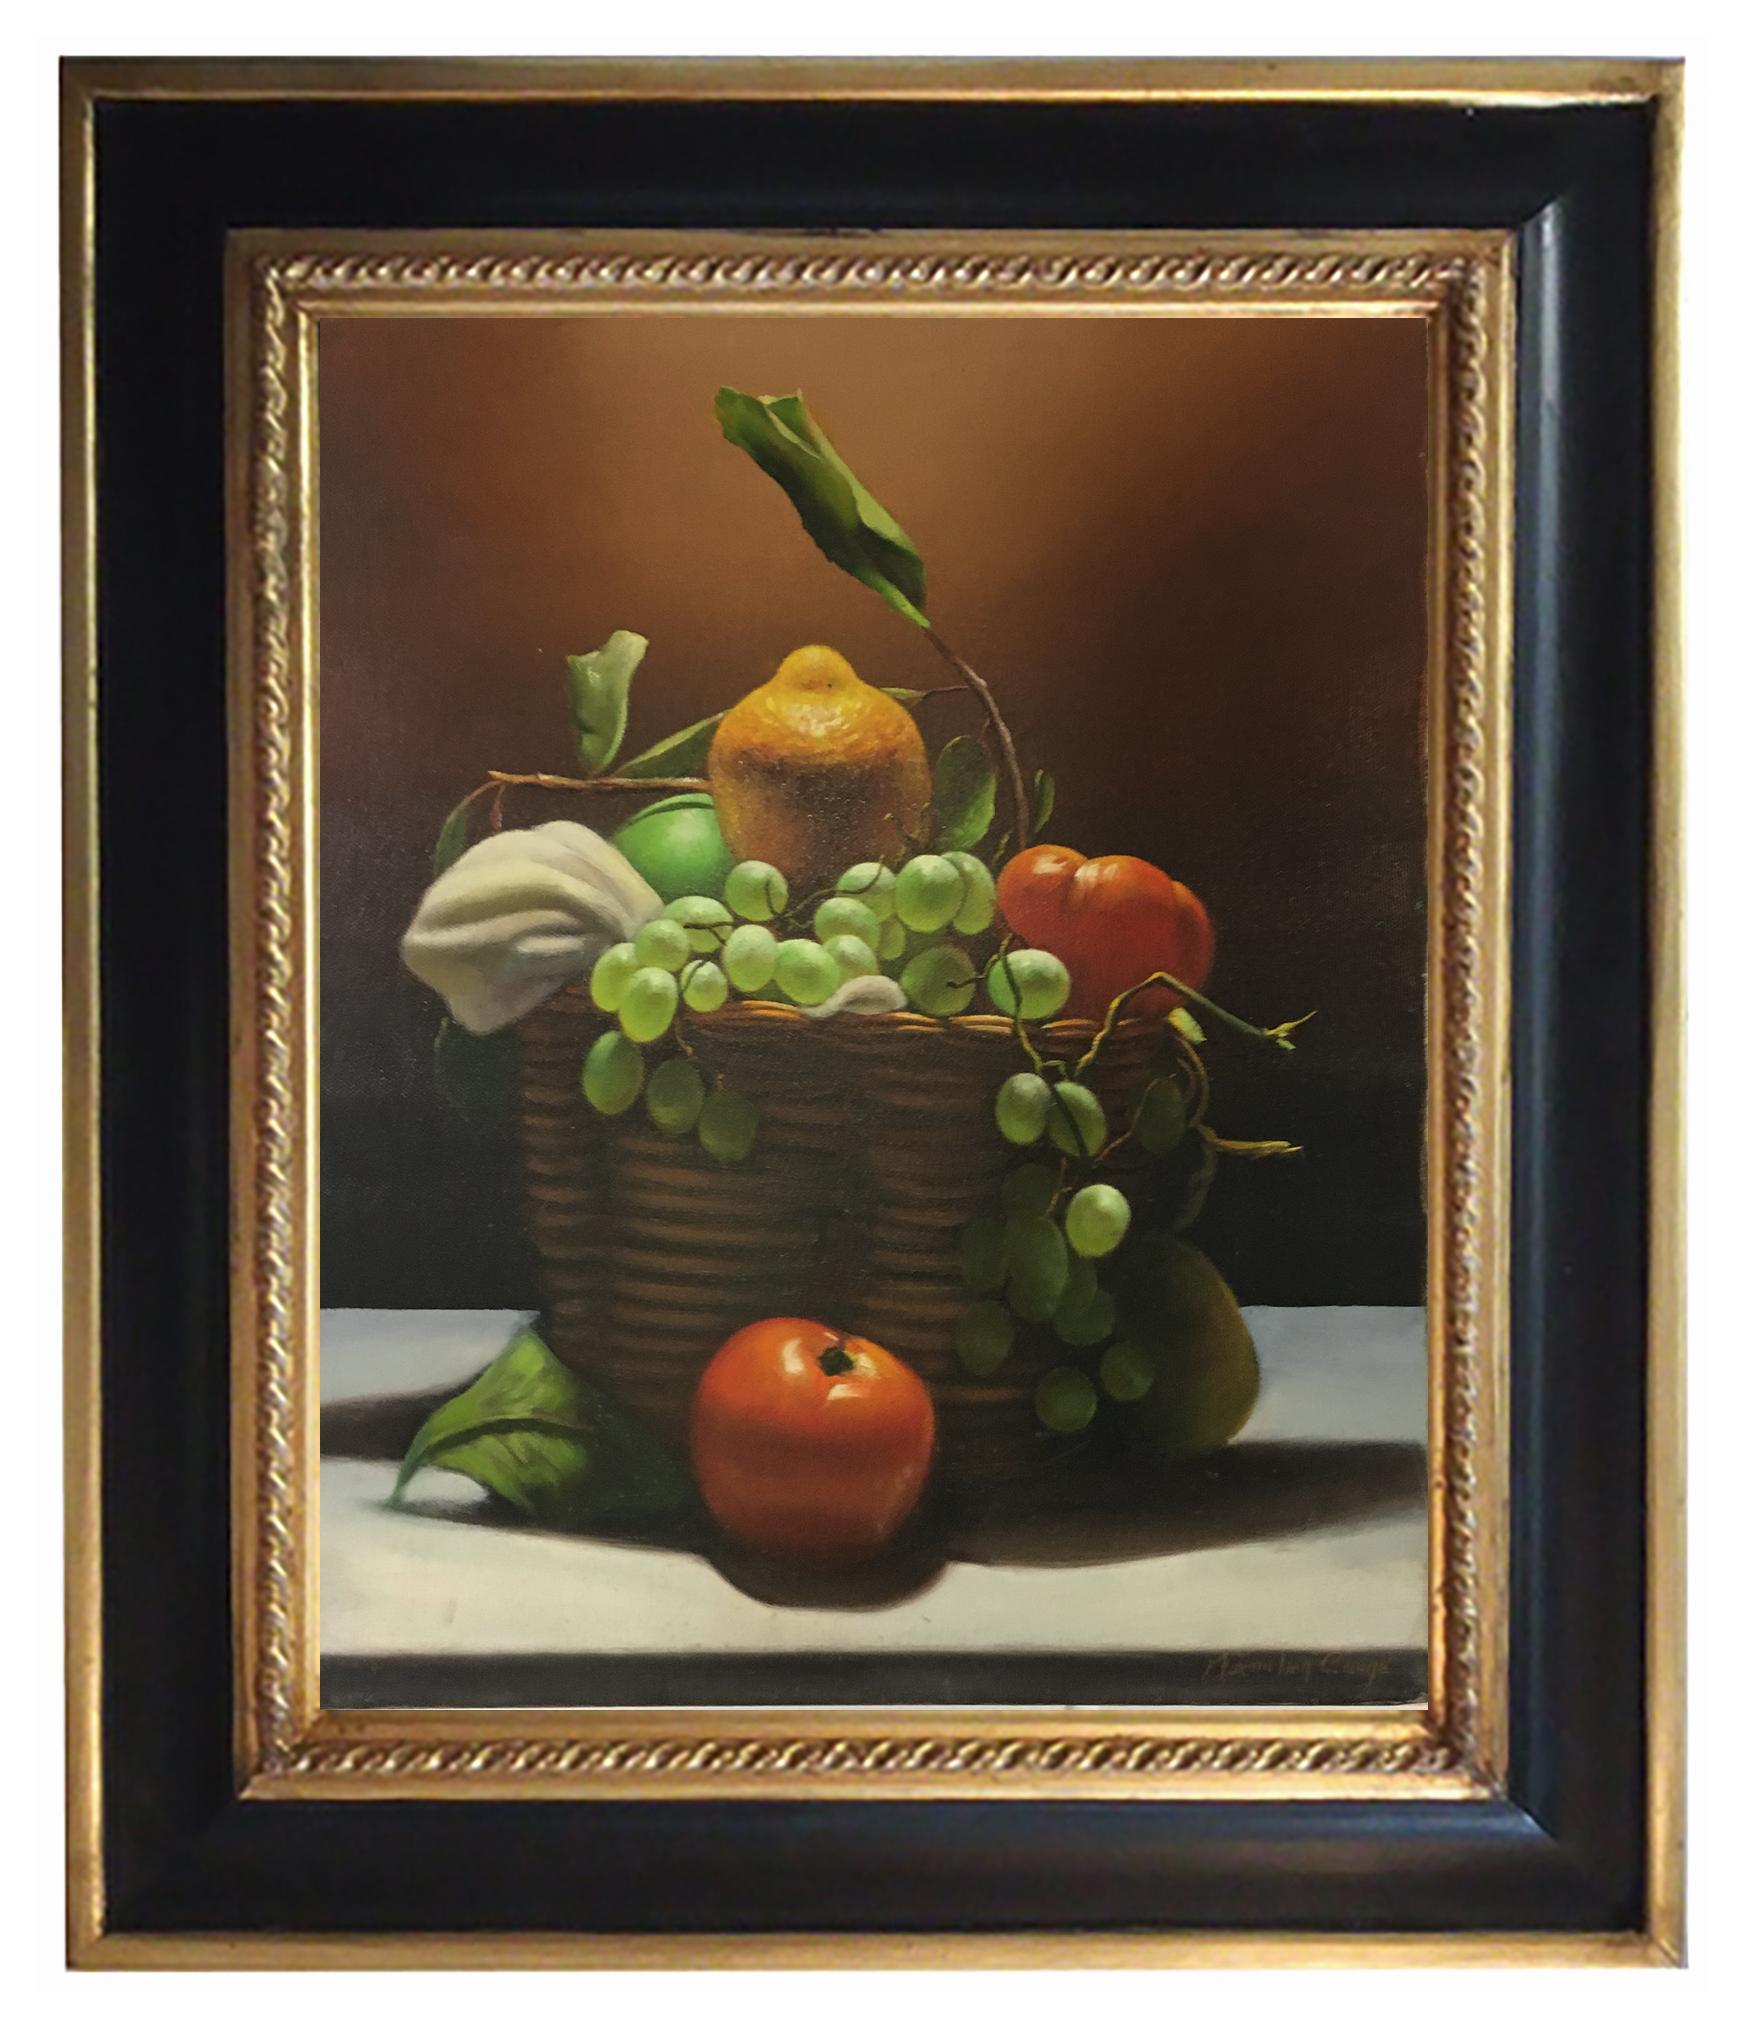 BASKET OF FRUIT - Hyperrealism - Italian still life oil on canvas painting,  - Painting by Maximilian Ciccone